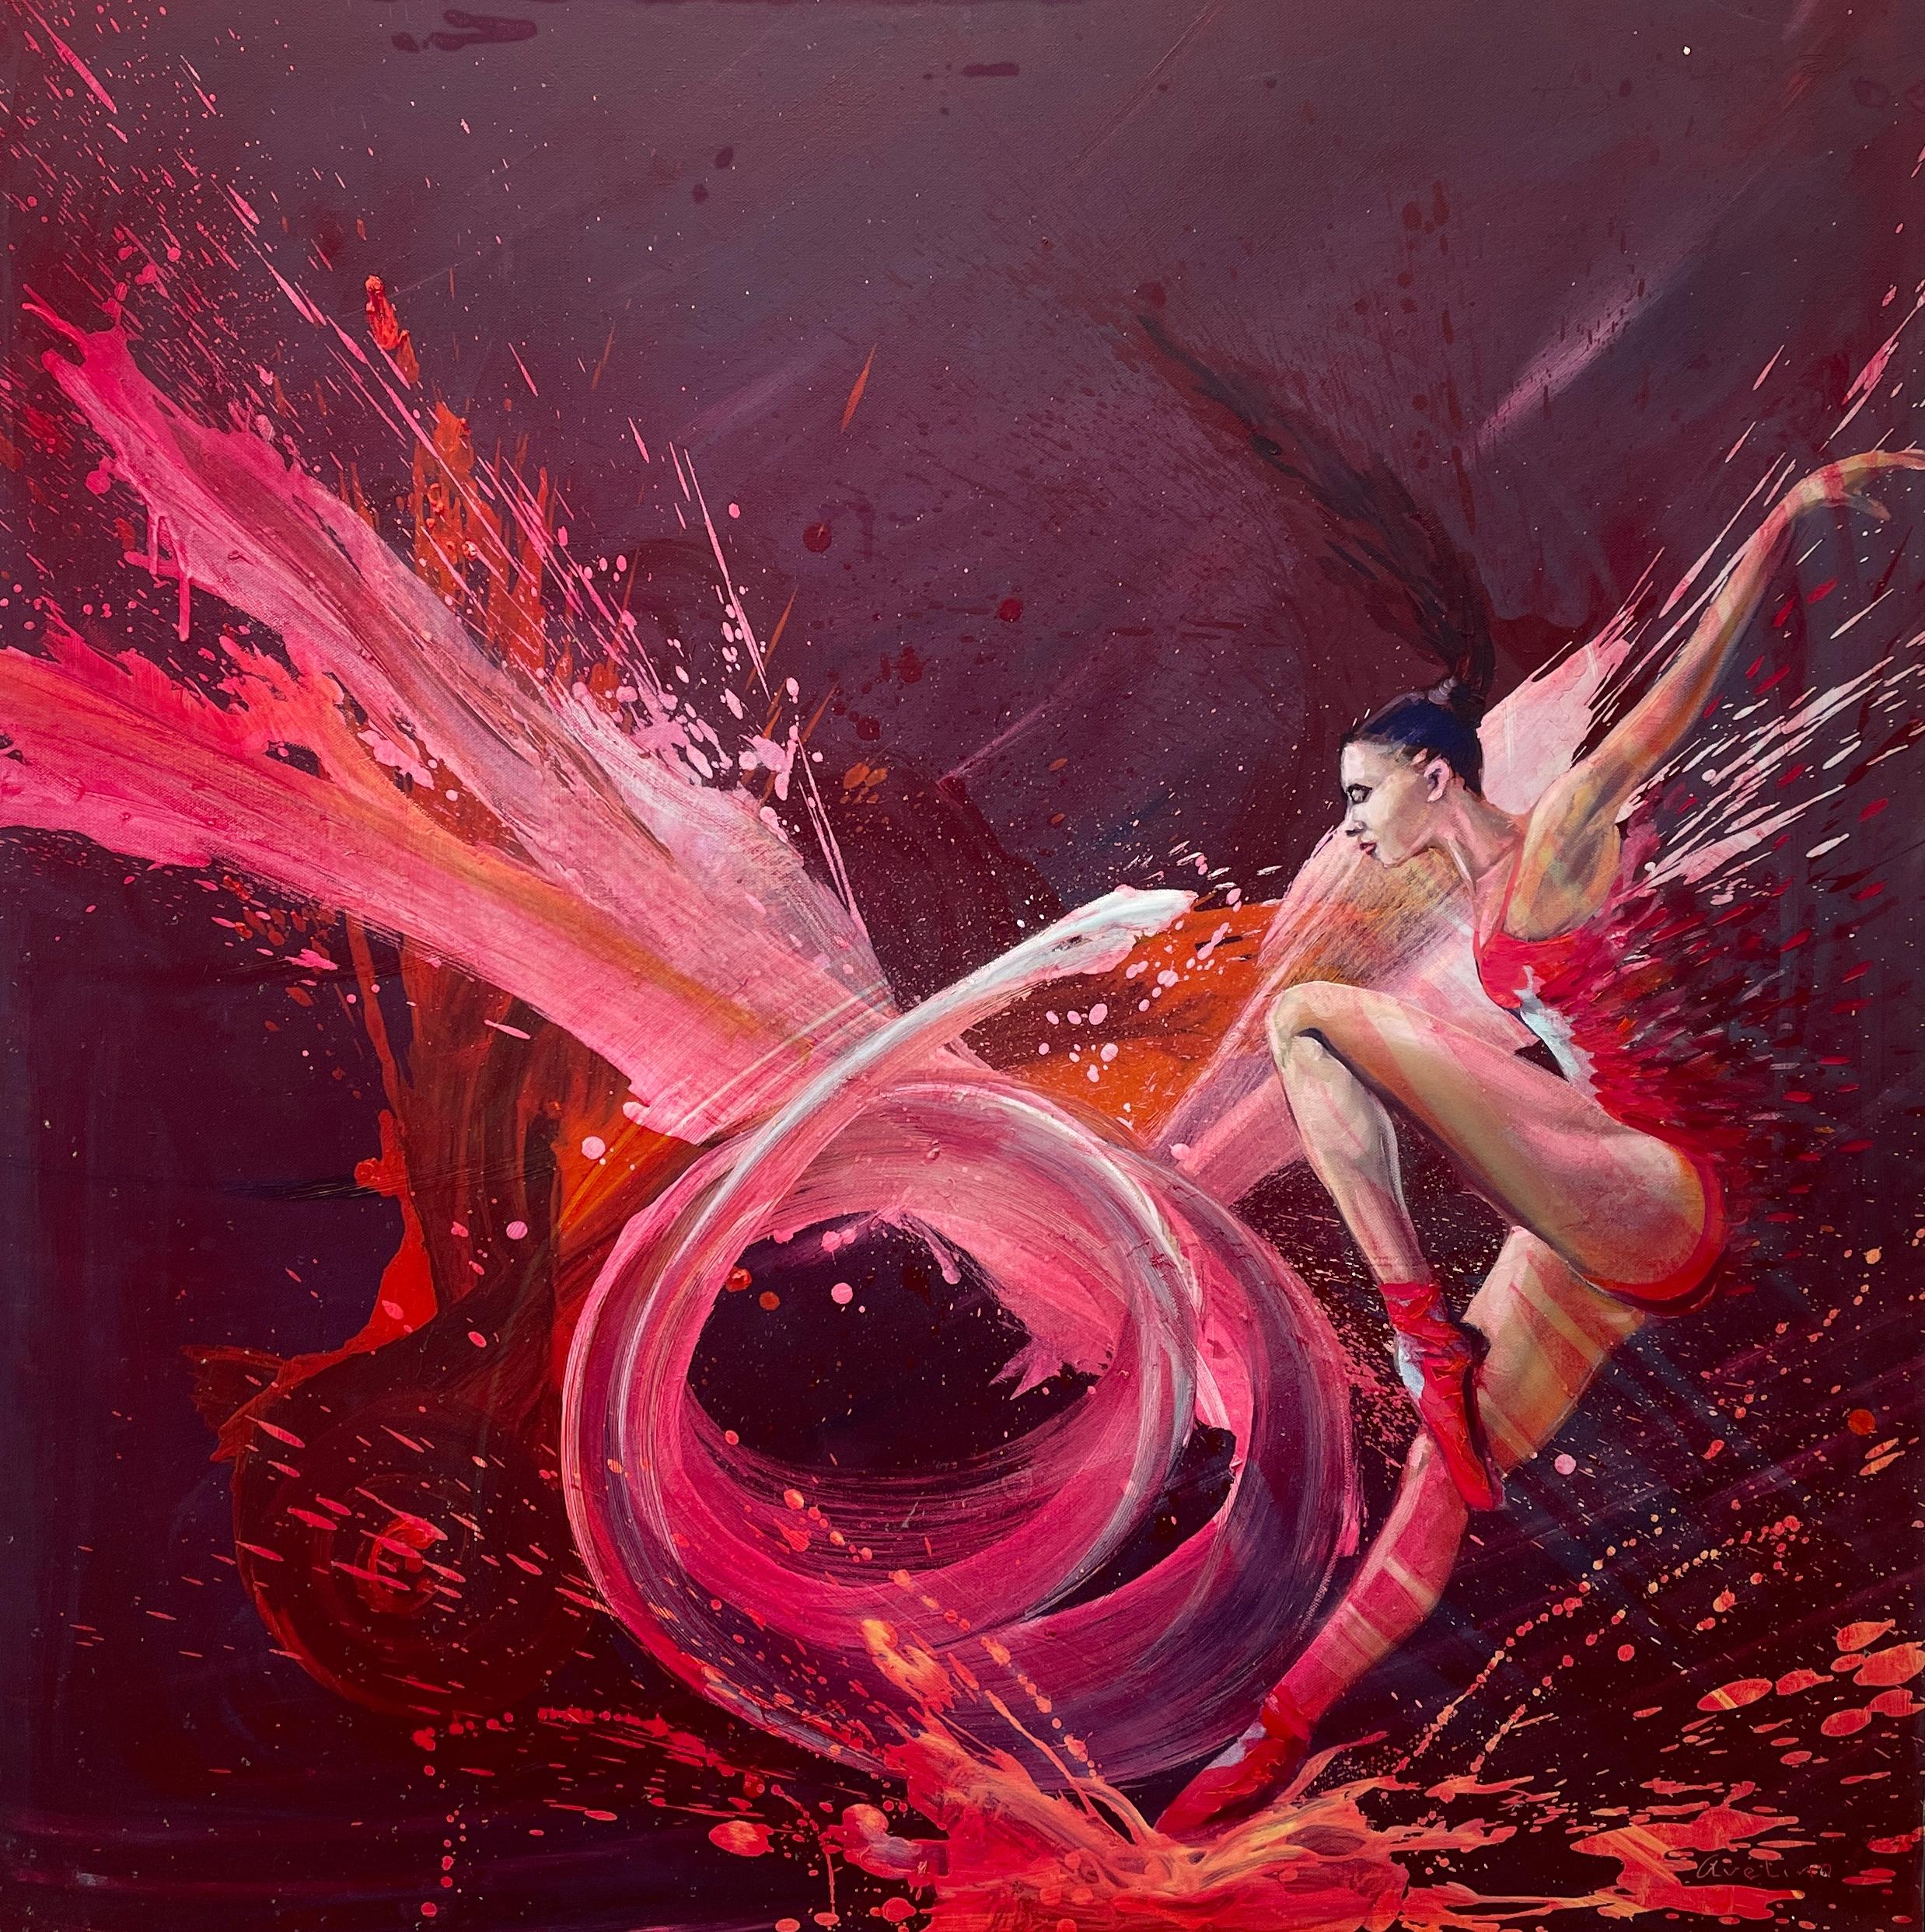 Avelino Sanher Figurative Painting - 'The Ballerina' - Red & White Contemporary Figurative Abstract by Avelino